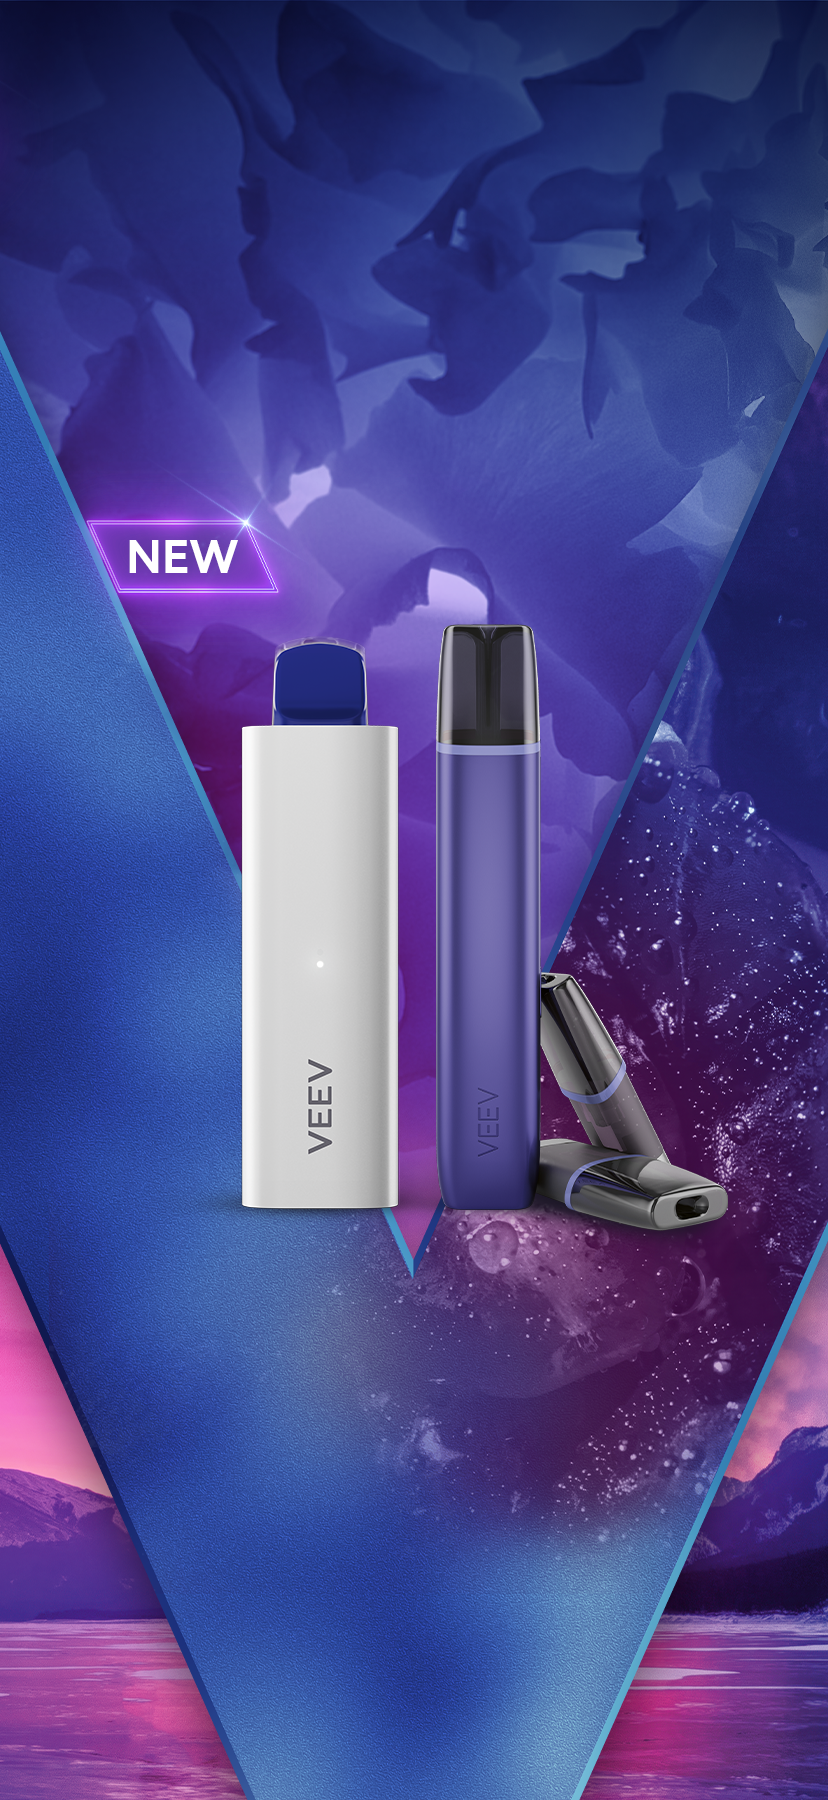 Intense fruit- VEEV NOW 5 mL and VEEV NOW device on purple background.